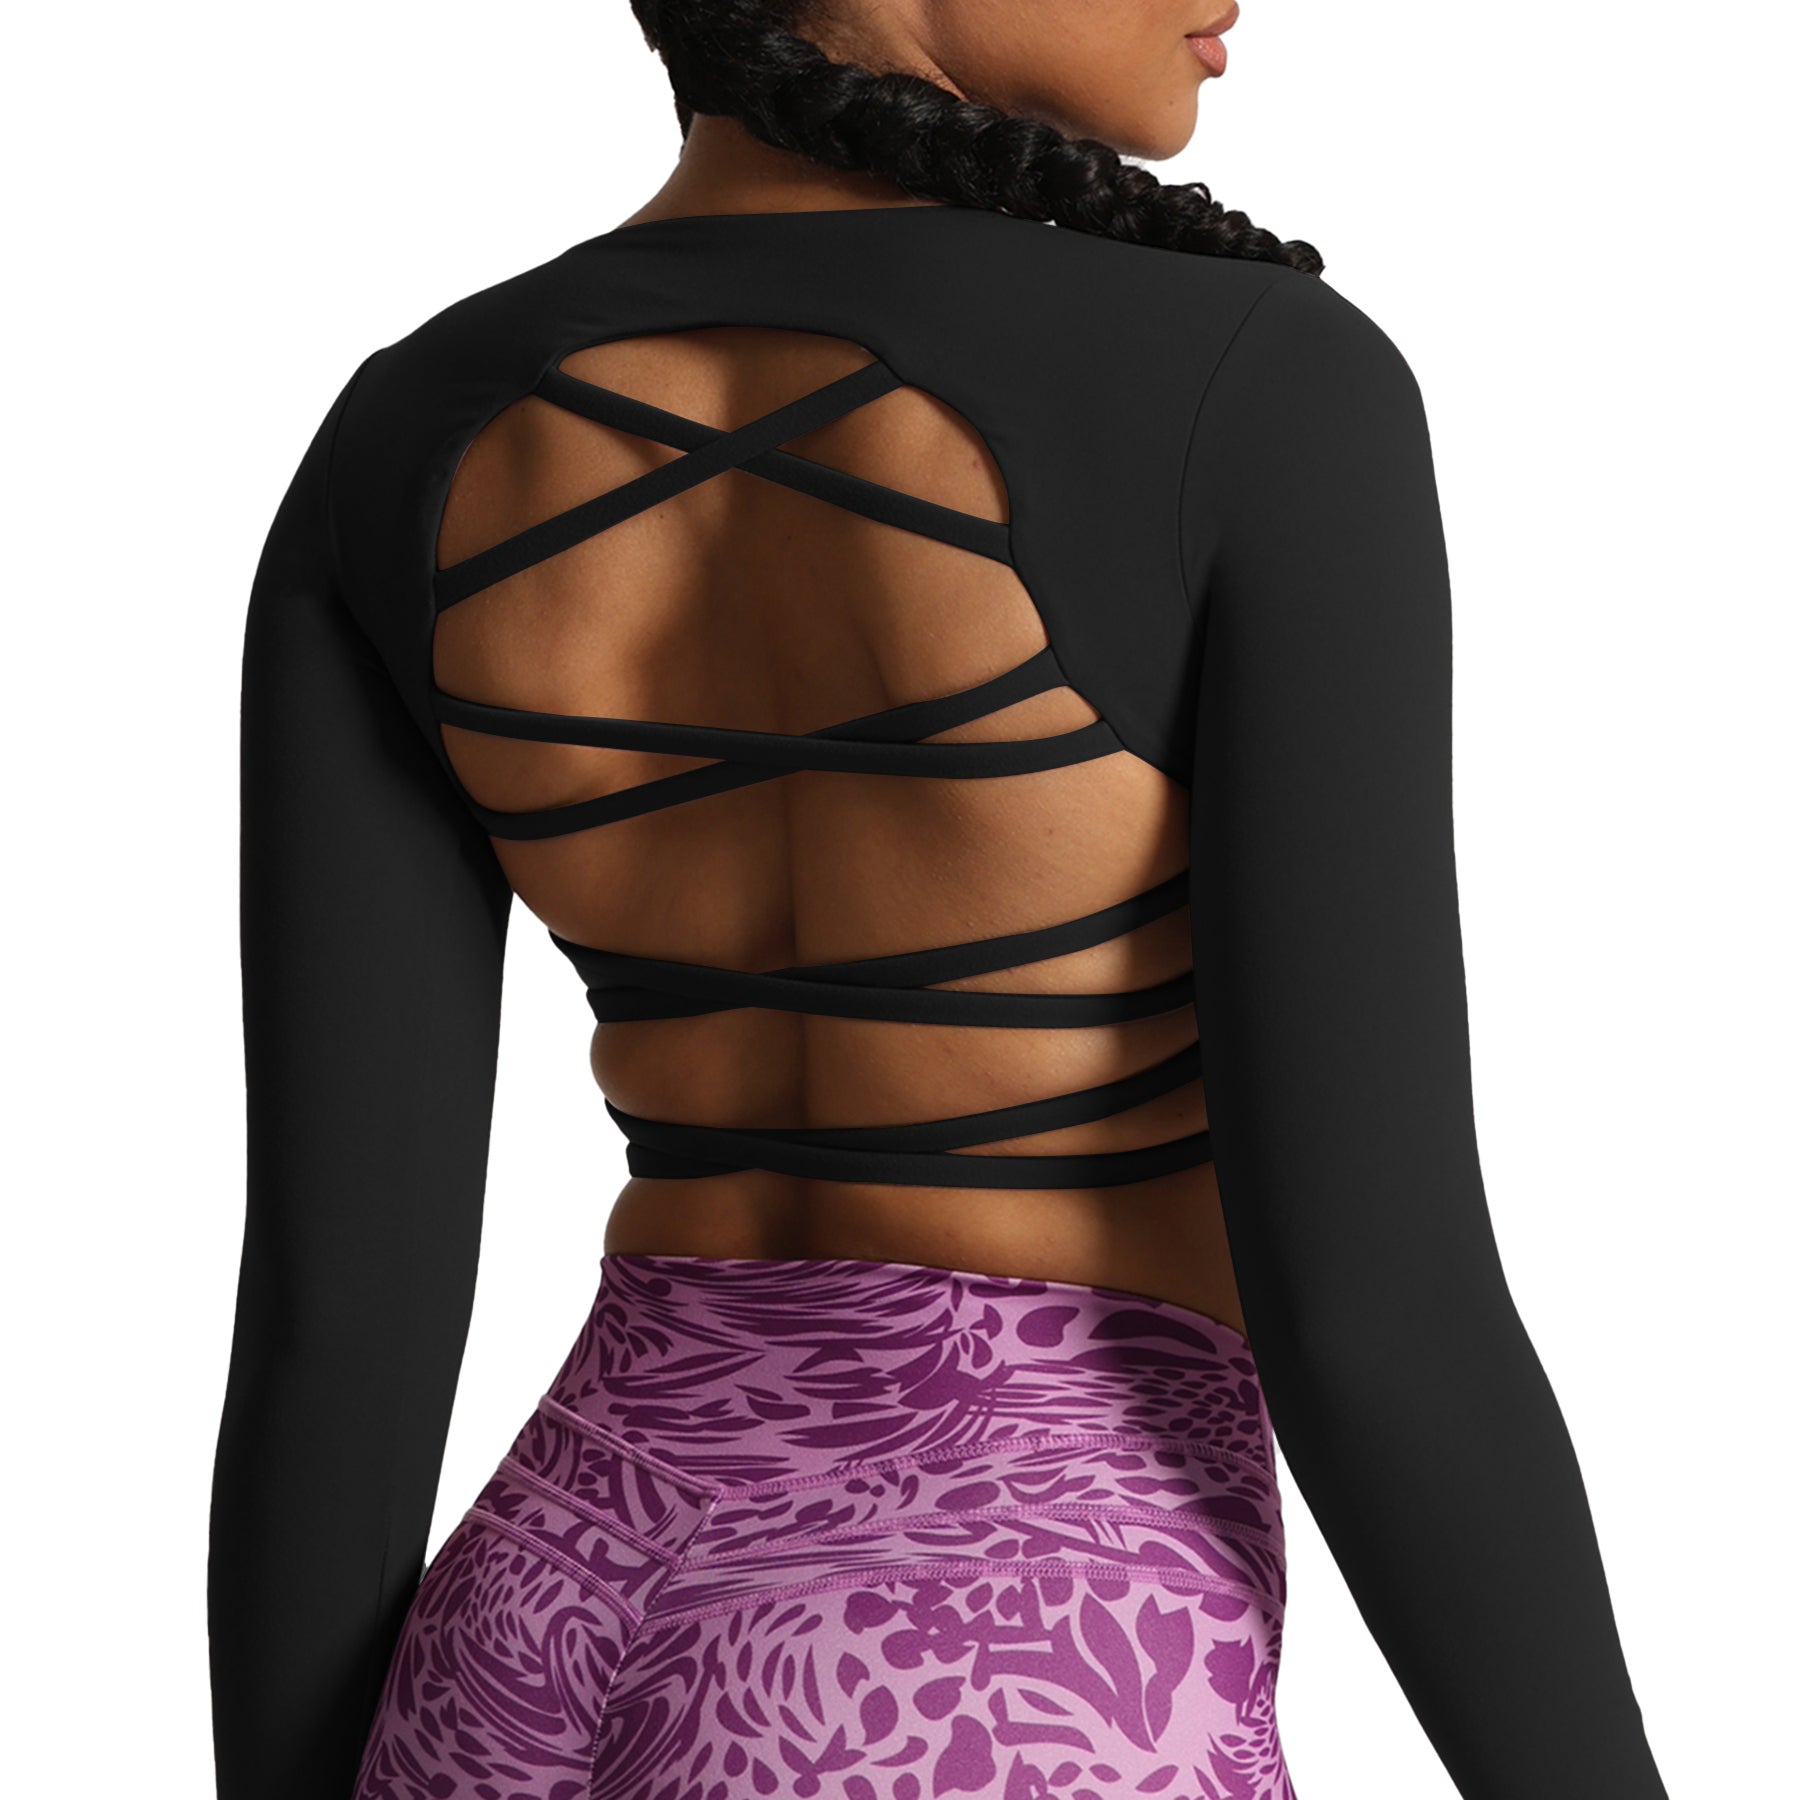 Aoxjox Lacey Long-Sleeve Crop